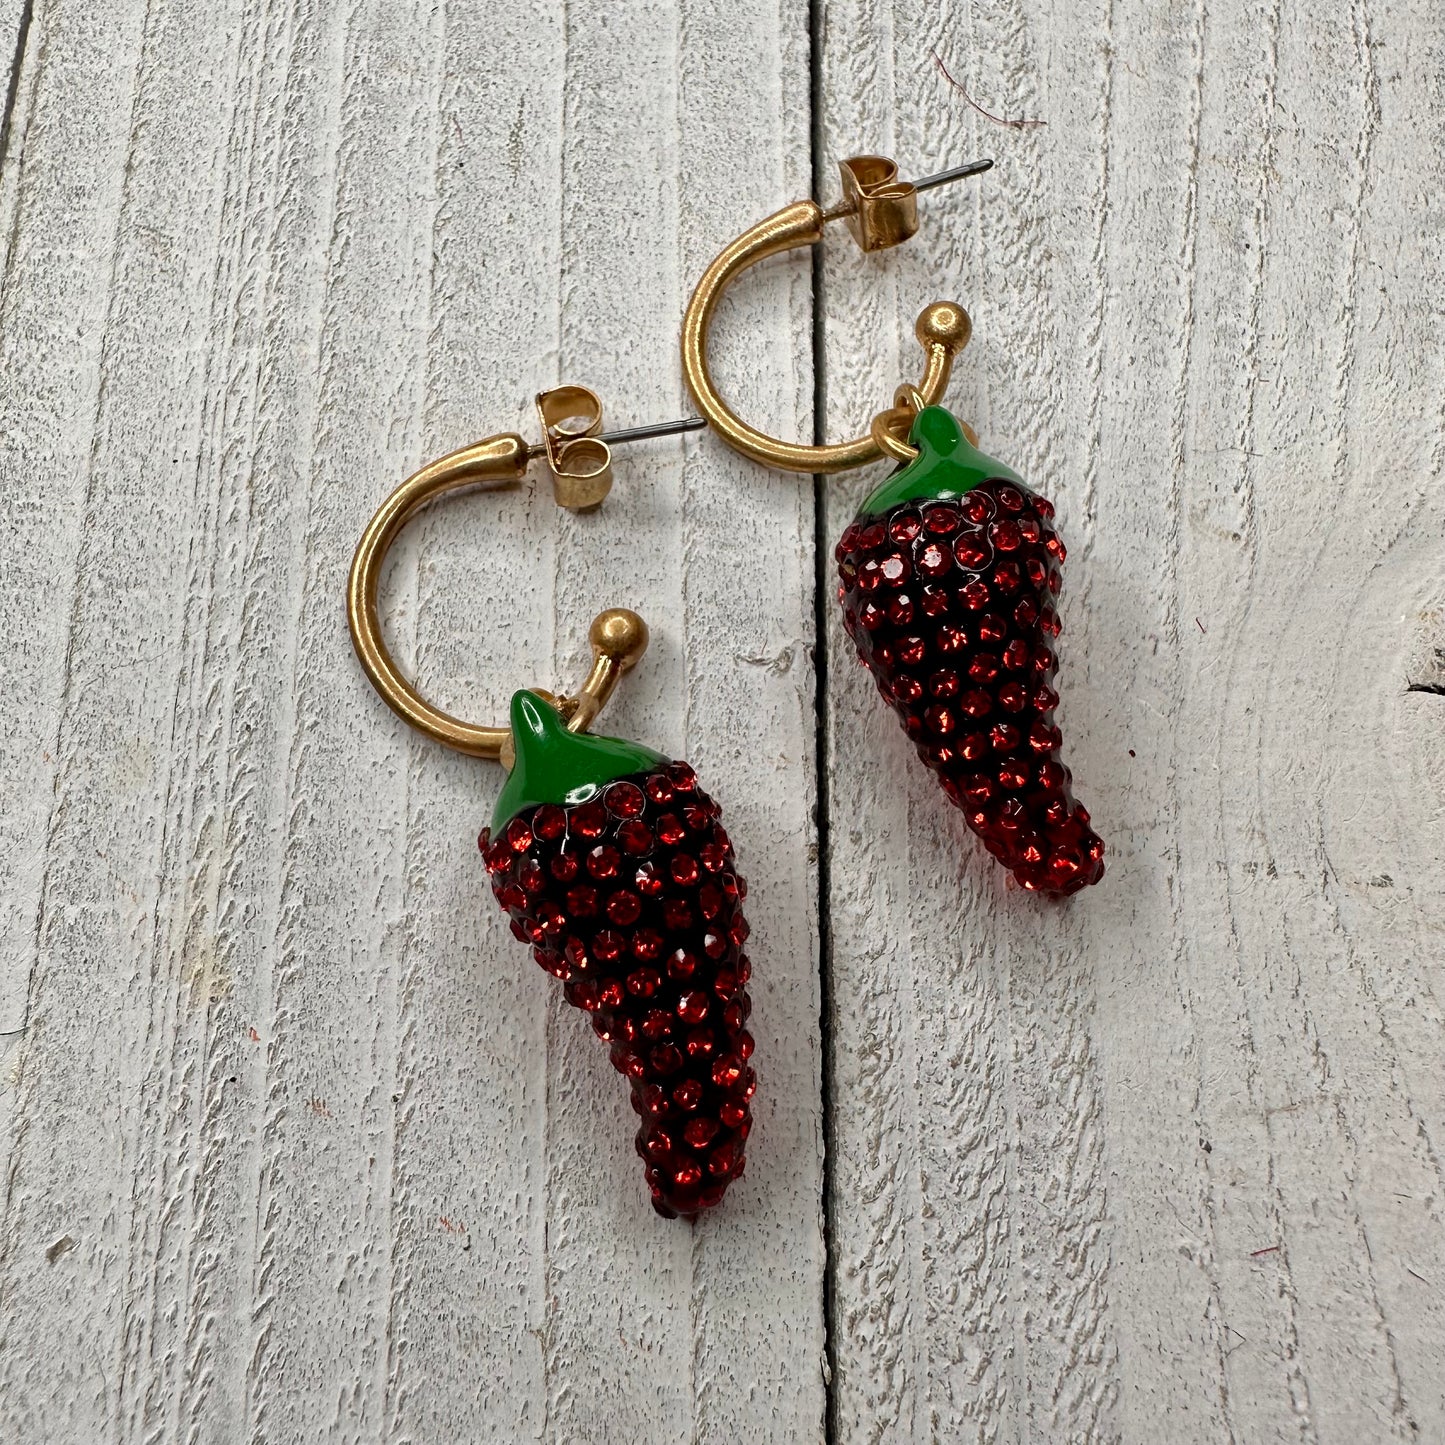 Gold Plated Earrings with Chilli Peppers as Charms